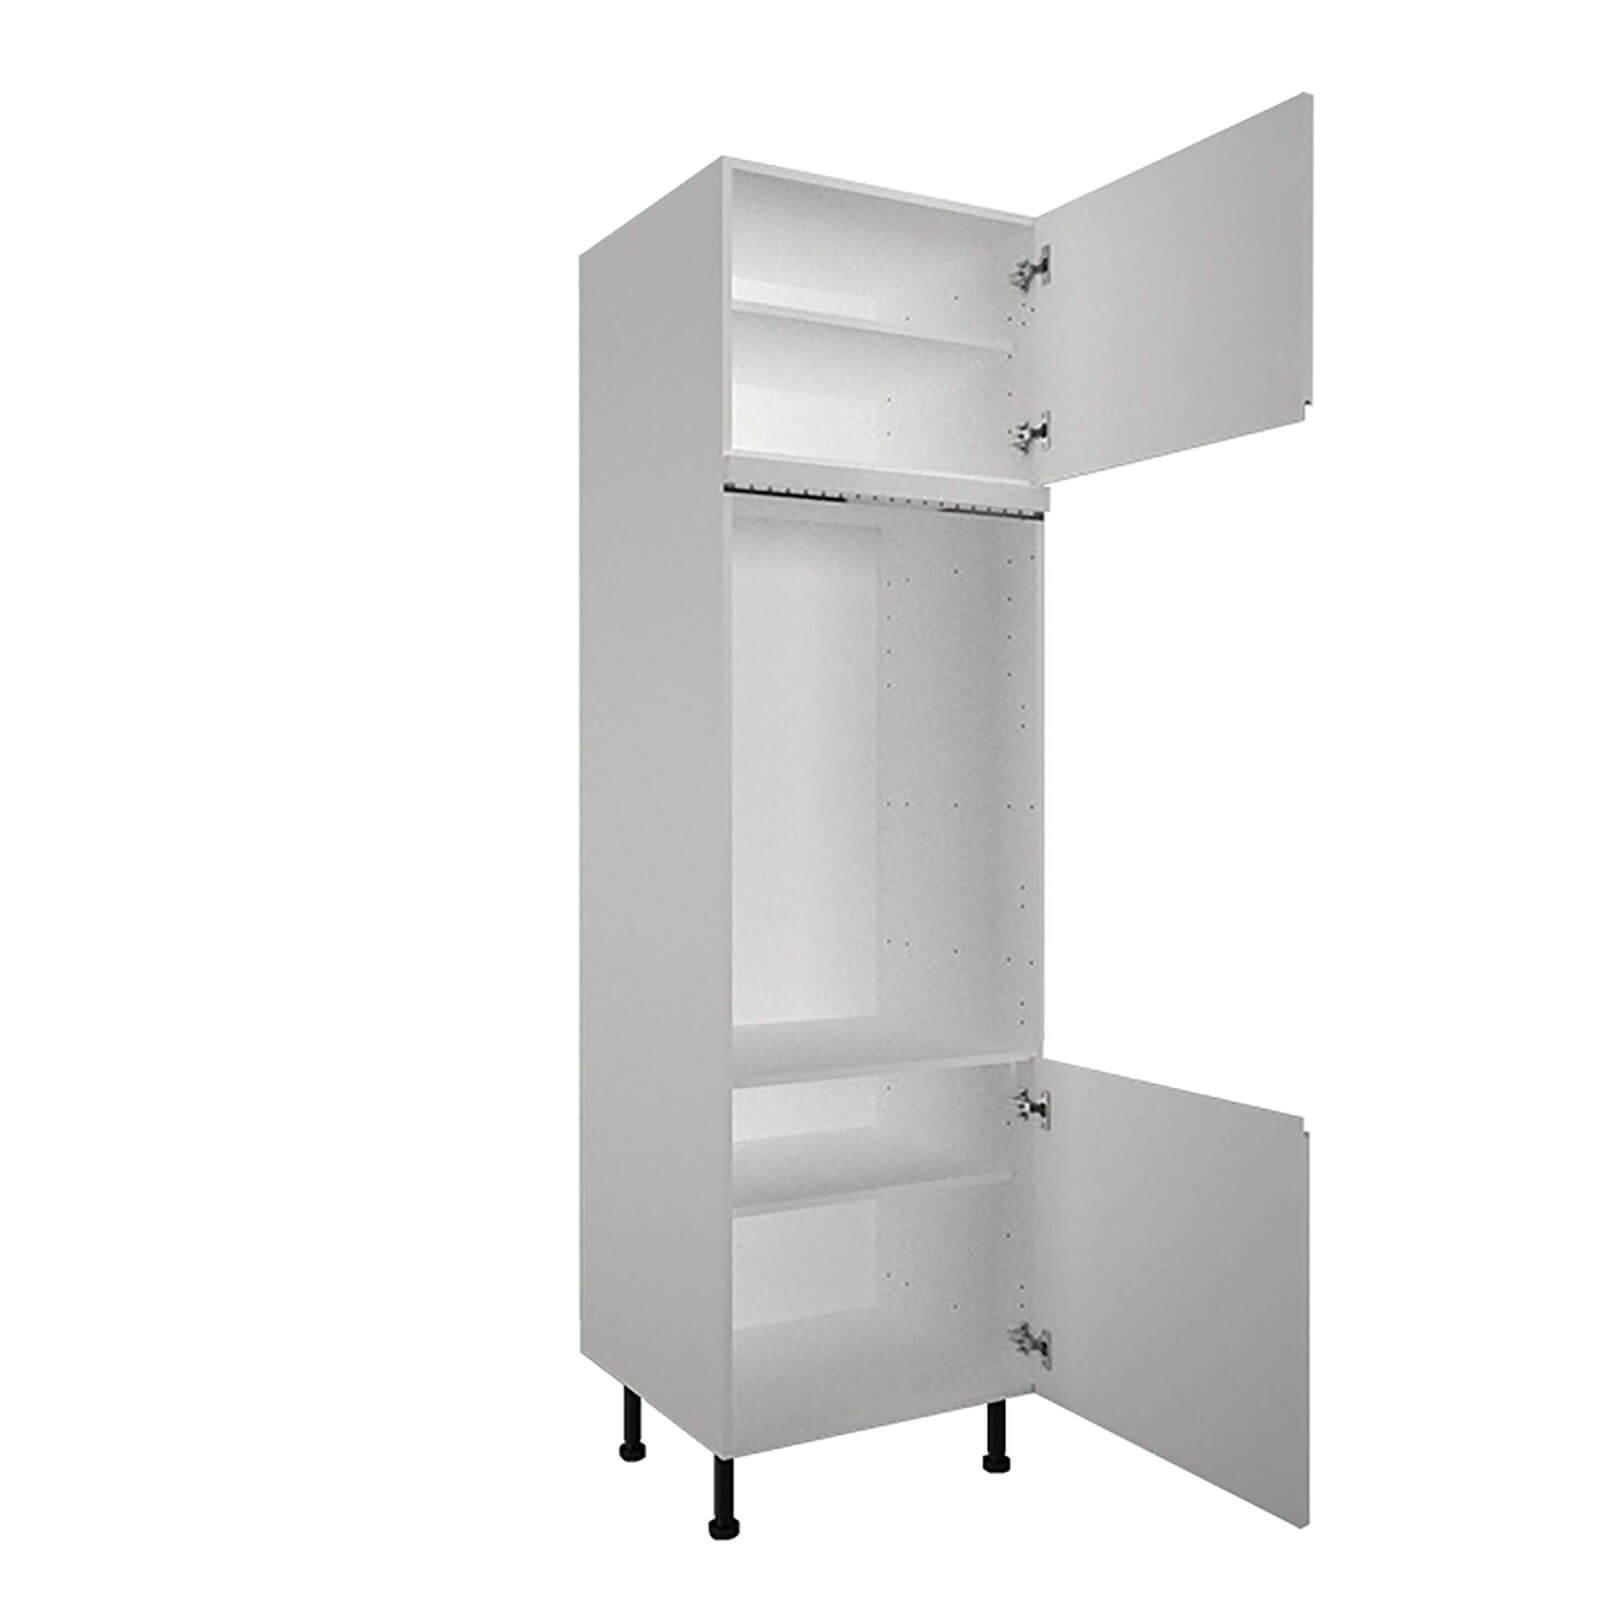 Handleless White Gloss Double Oven Tower Unit